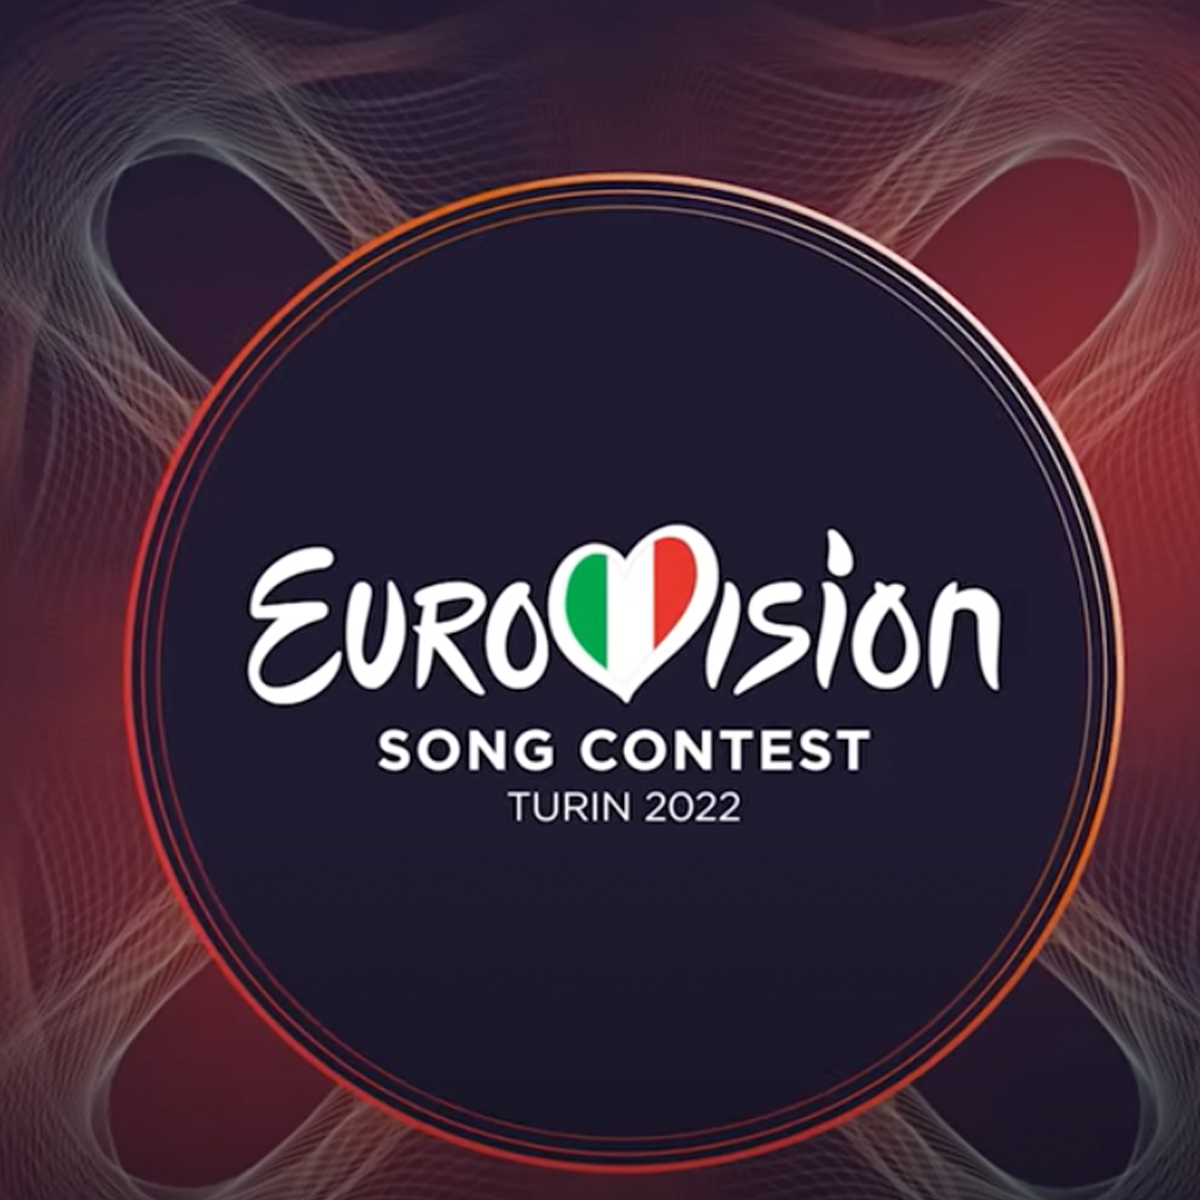 How to Watch Eurovision 2022